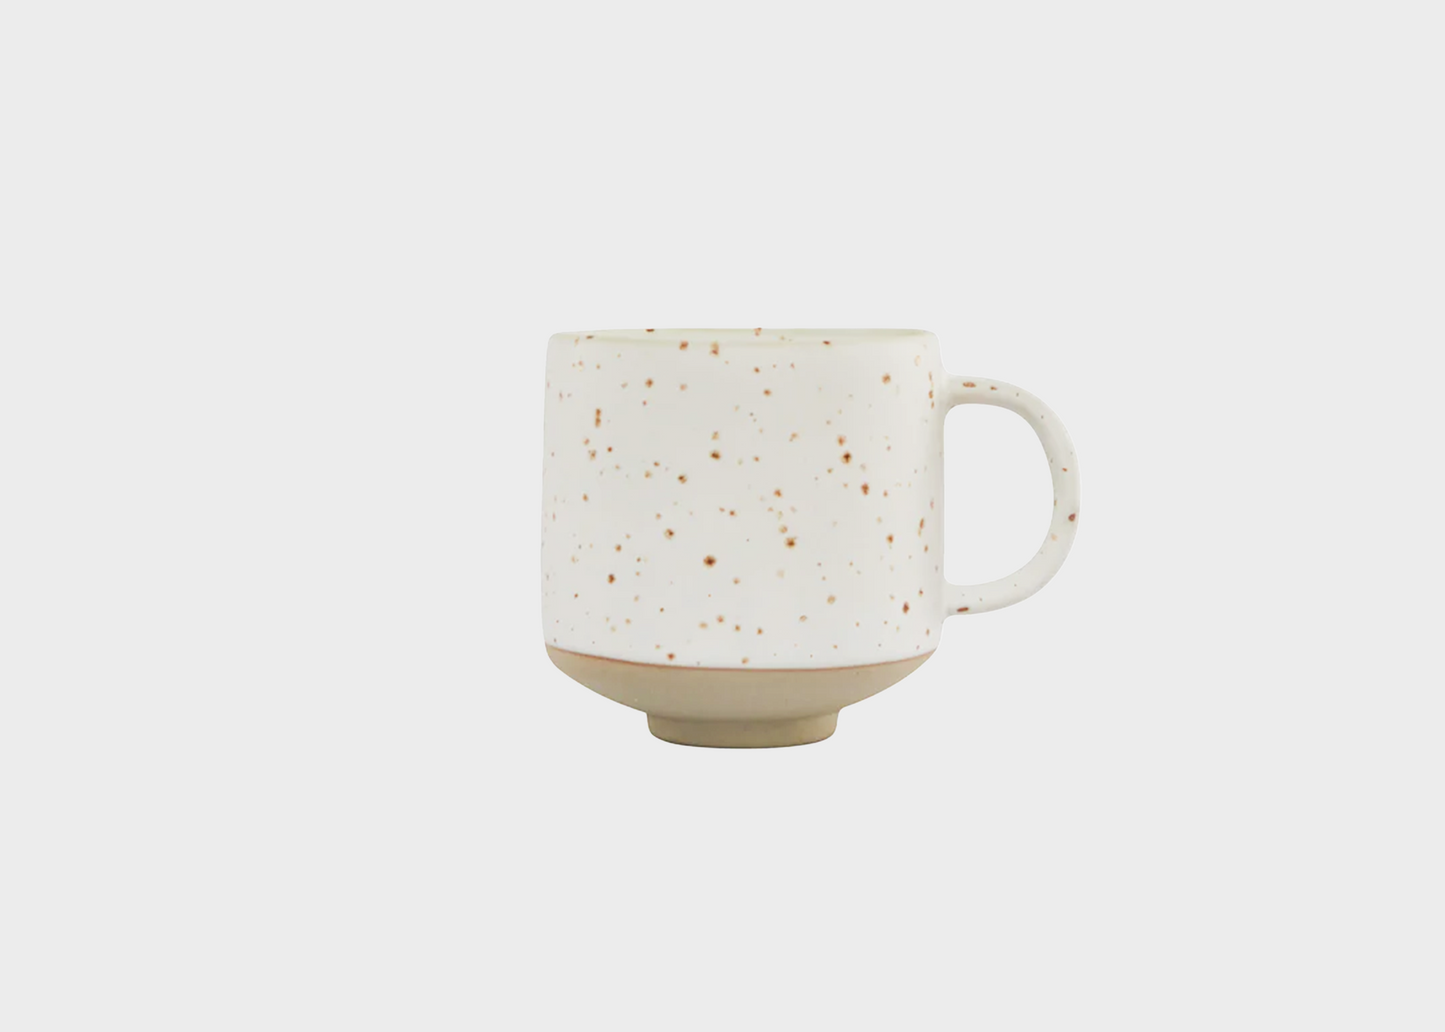 White Speckled Hagi mug cup sold at Woodland Mod by OyOy